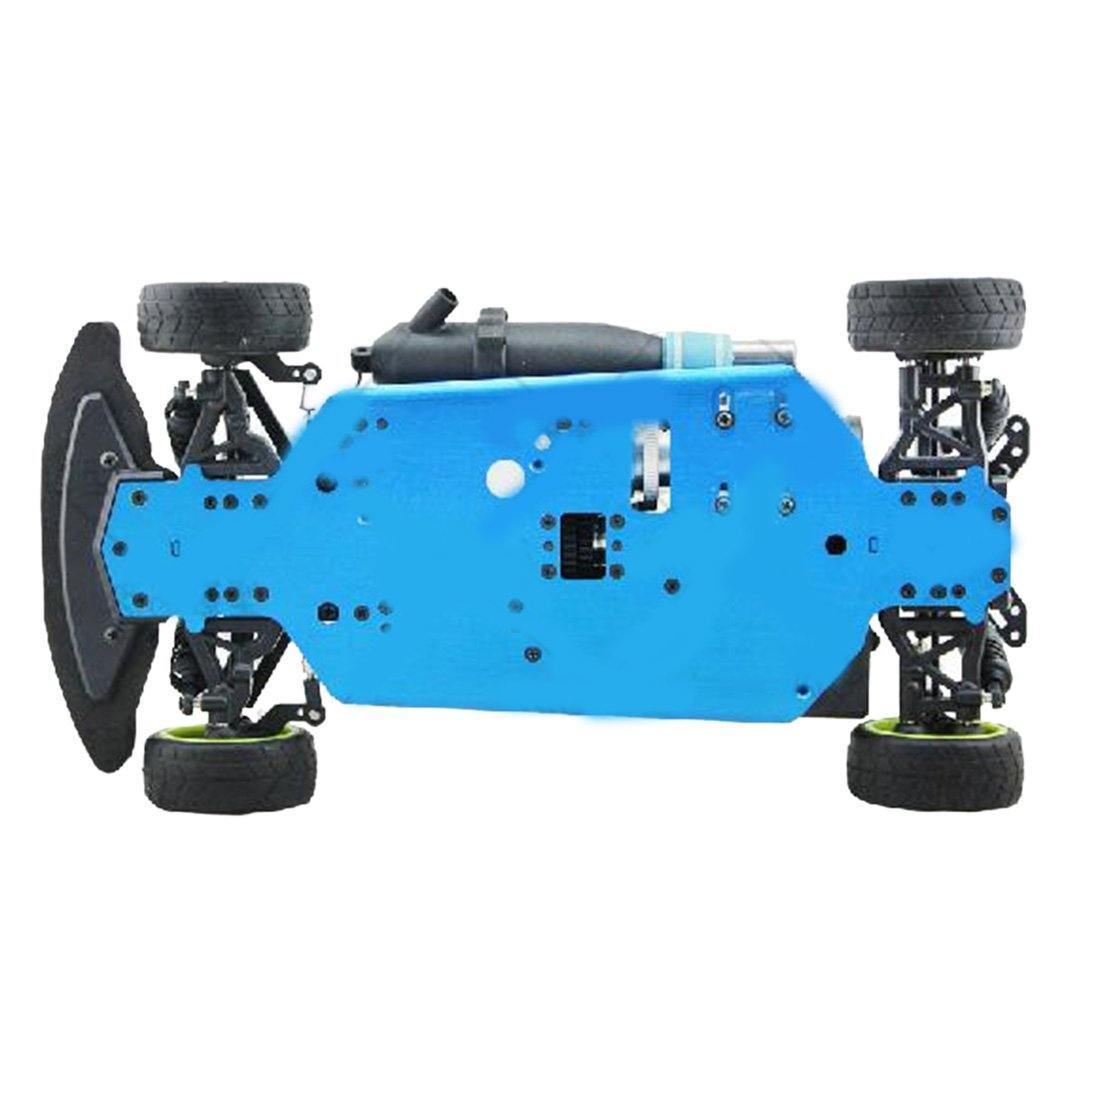 Fuel Drift Car Chassis Frame Kit GT2B RC Compatible With Toyan VX 